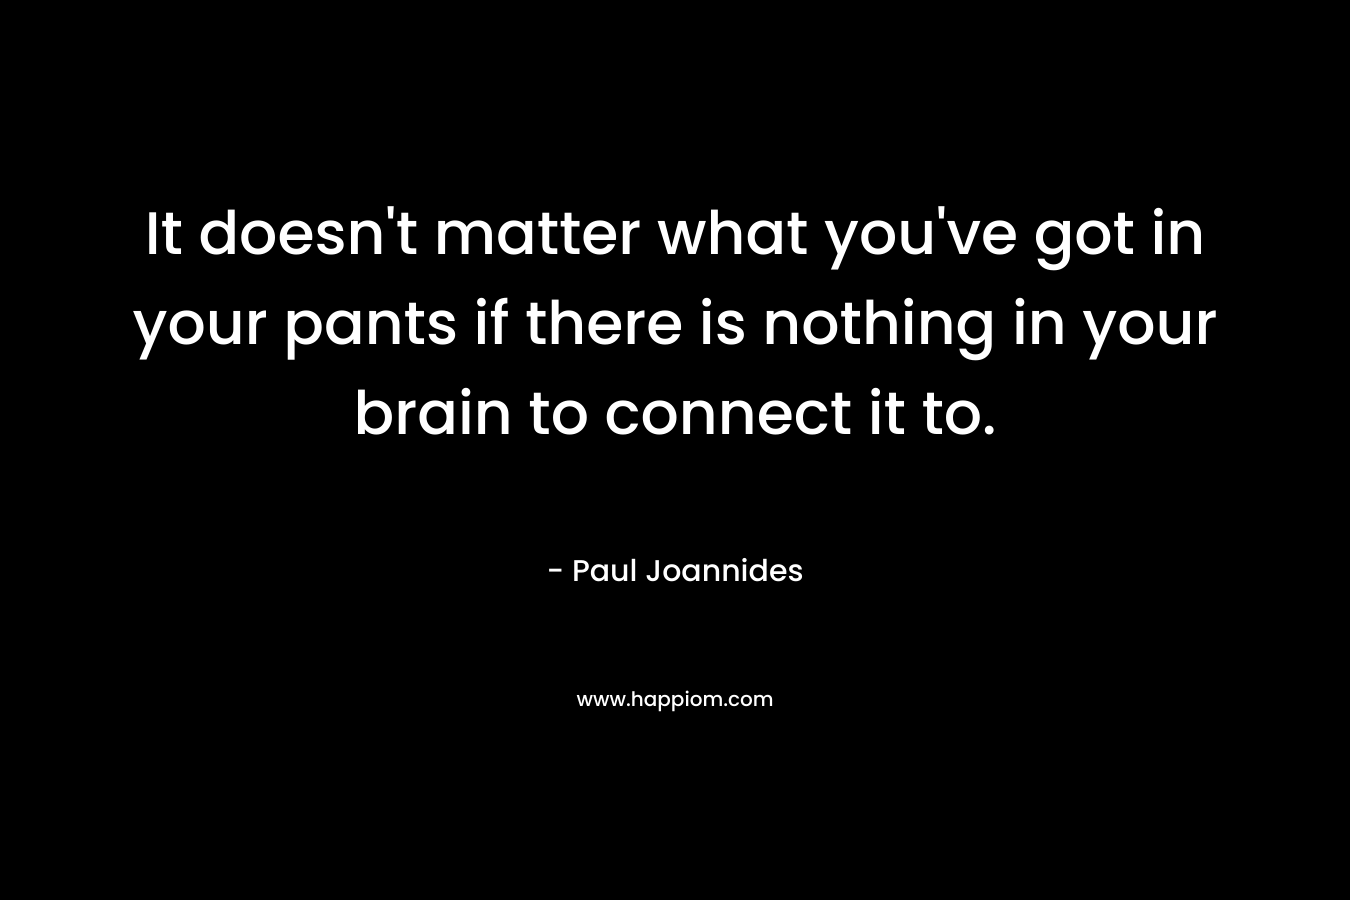 It doesn't matter what you've got in your pants if there is nothing in your brain to connect it to.